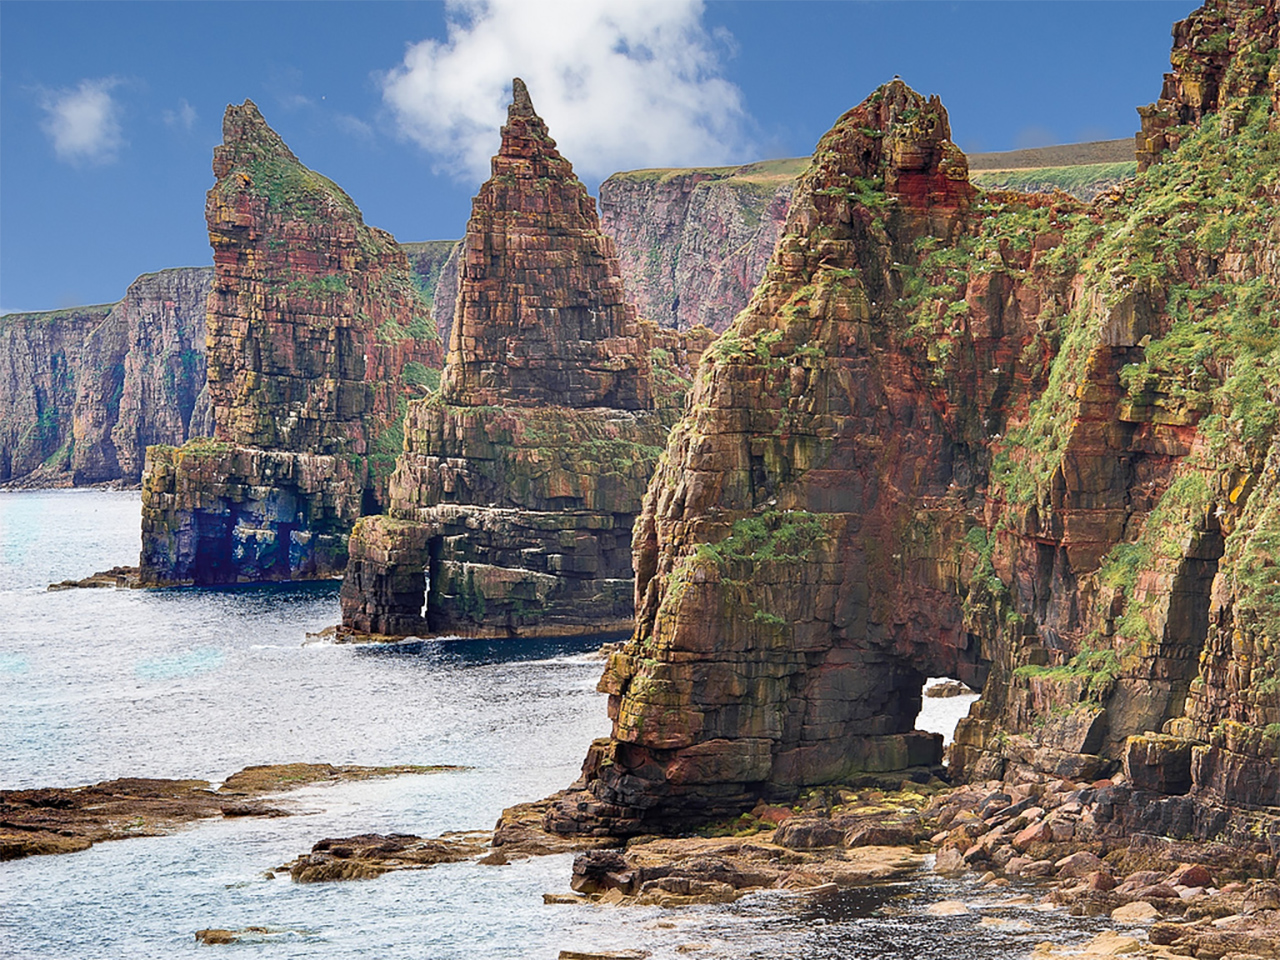 At the Duncansby Stacks